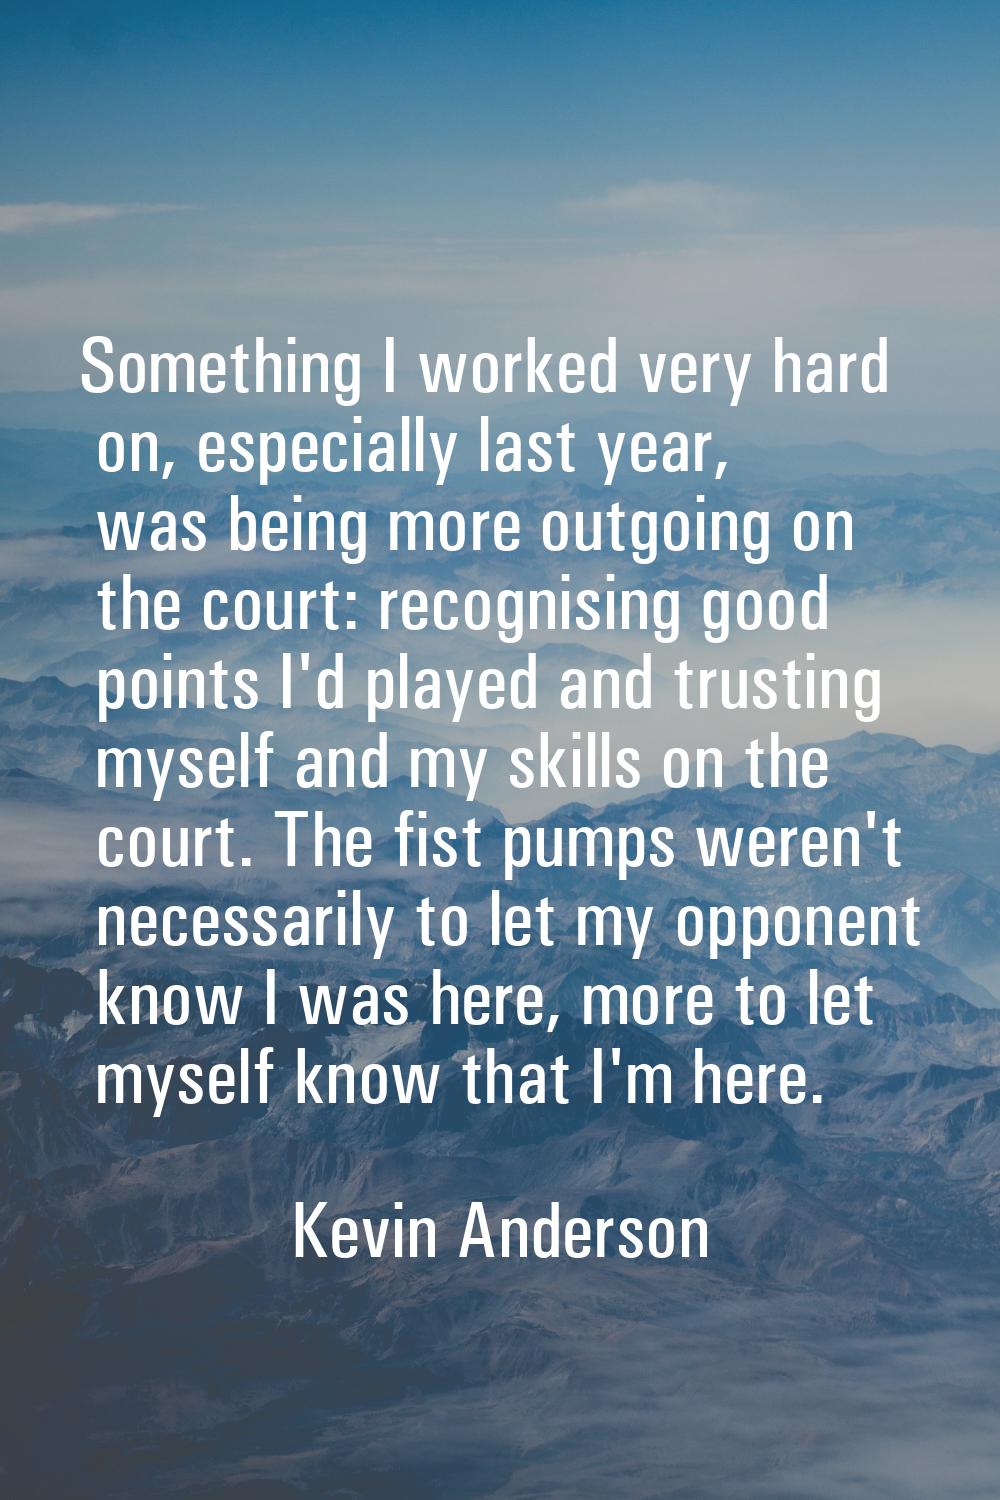 Something I worked very hard on, especially last year, was being more outgoing on the court: recogn